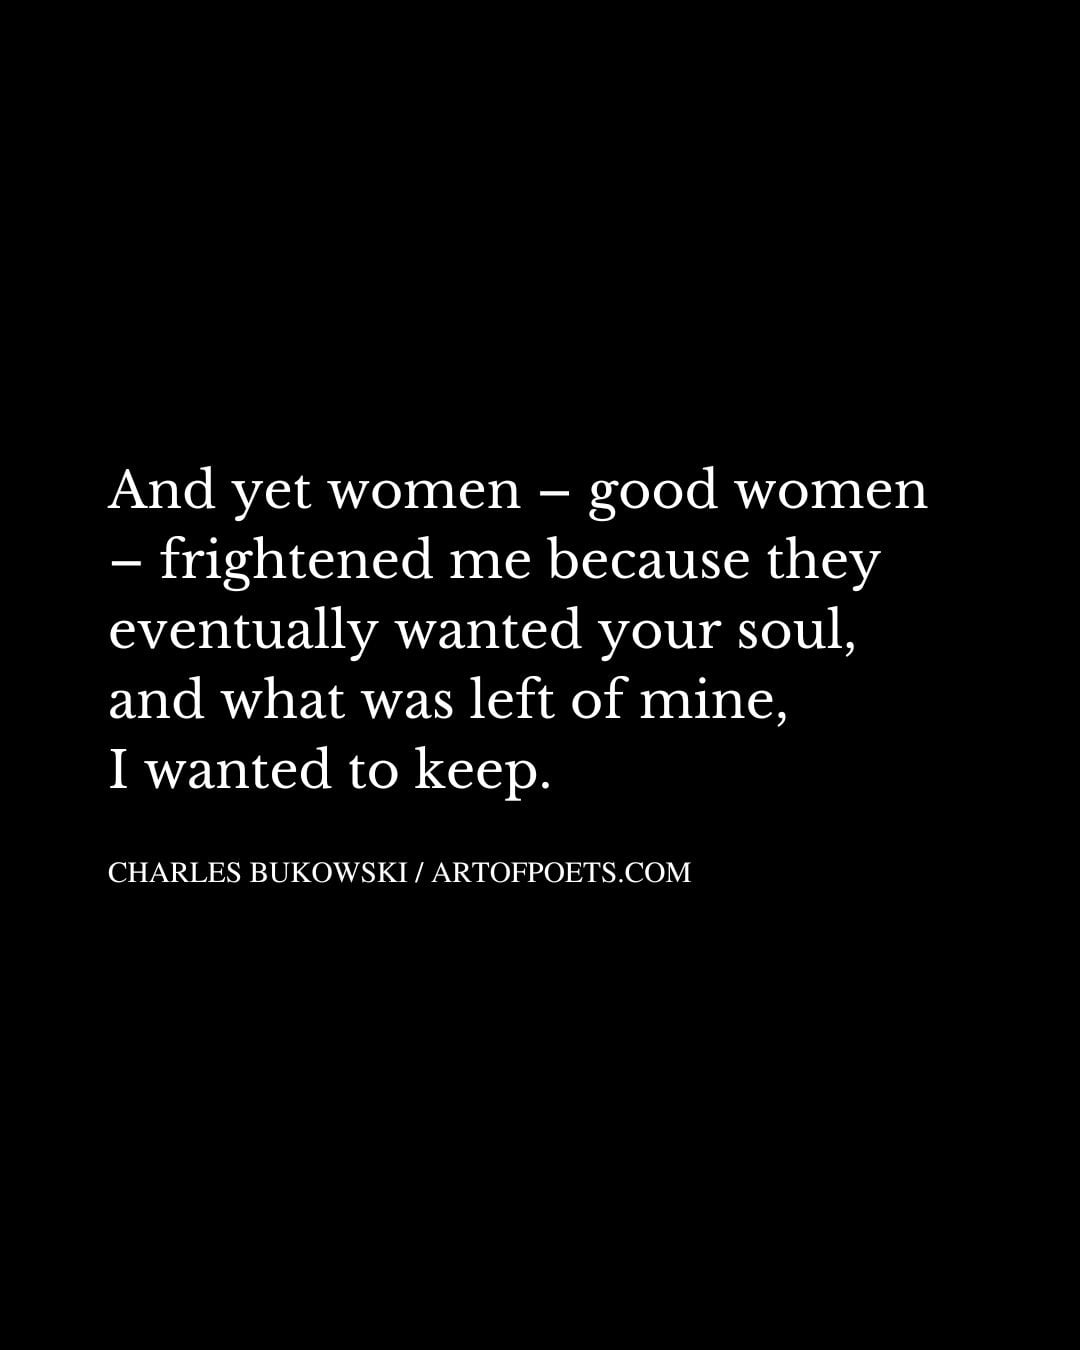 And yet women – good women – frightened me because they eventually wanted your soul and what was left of mine I wanted to keep 1